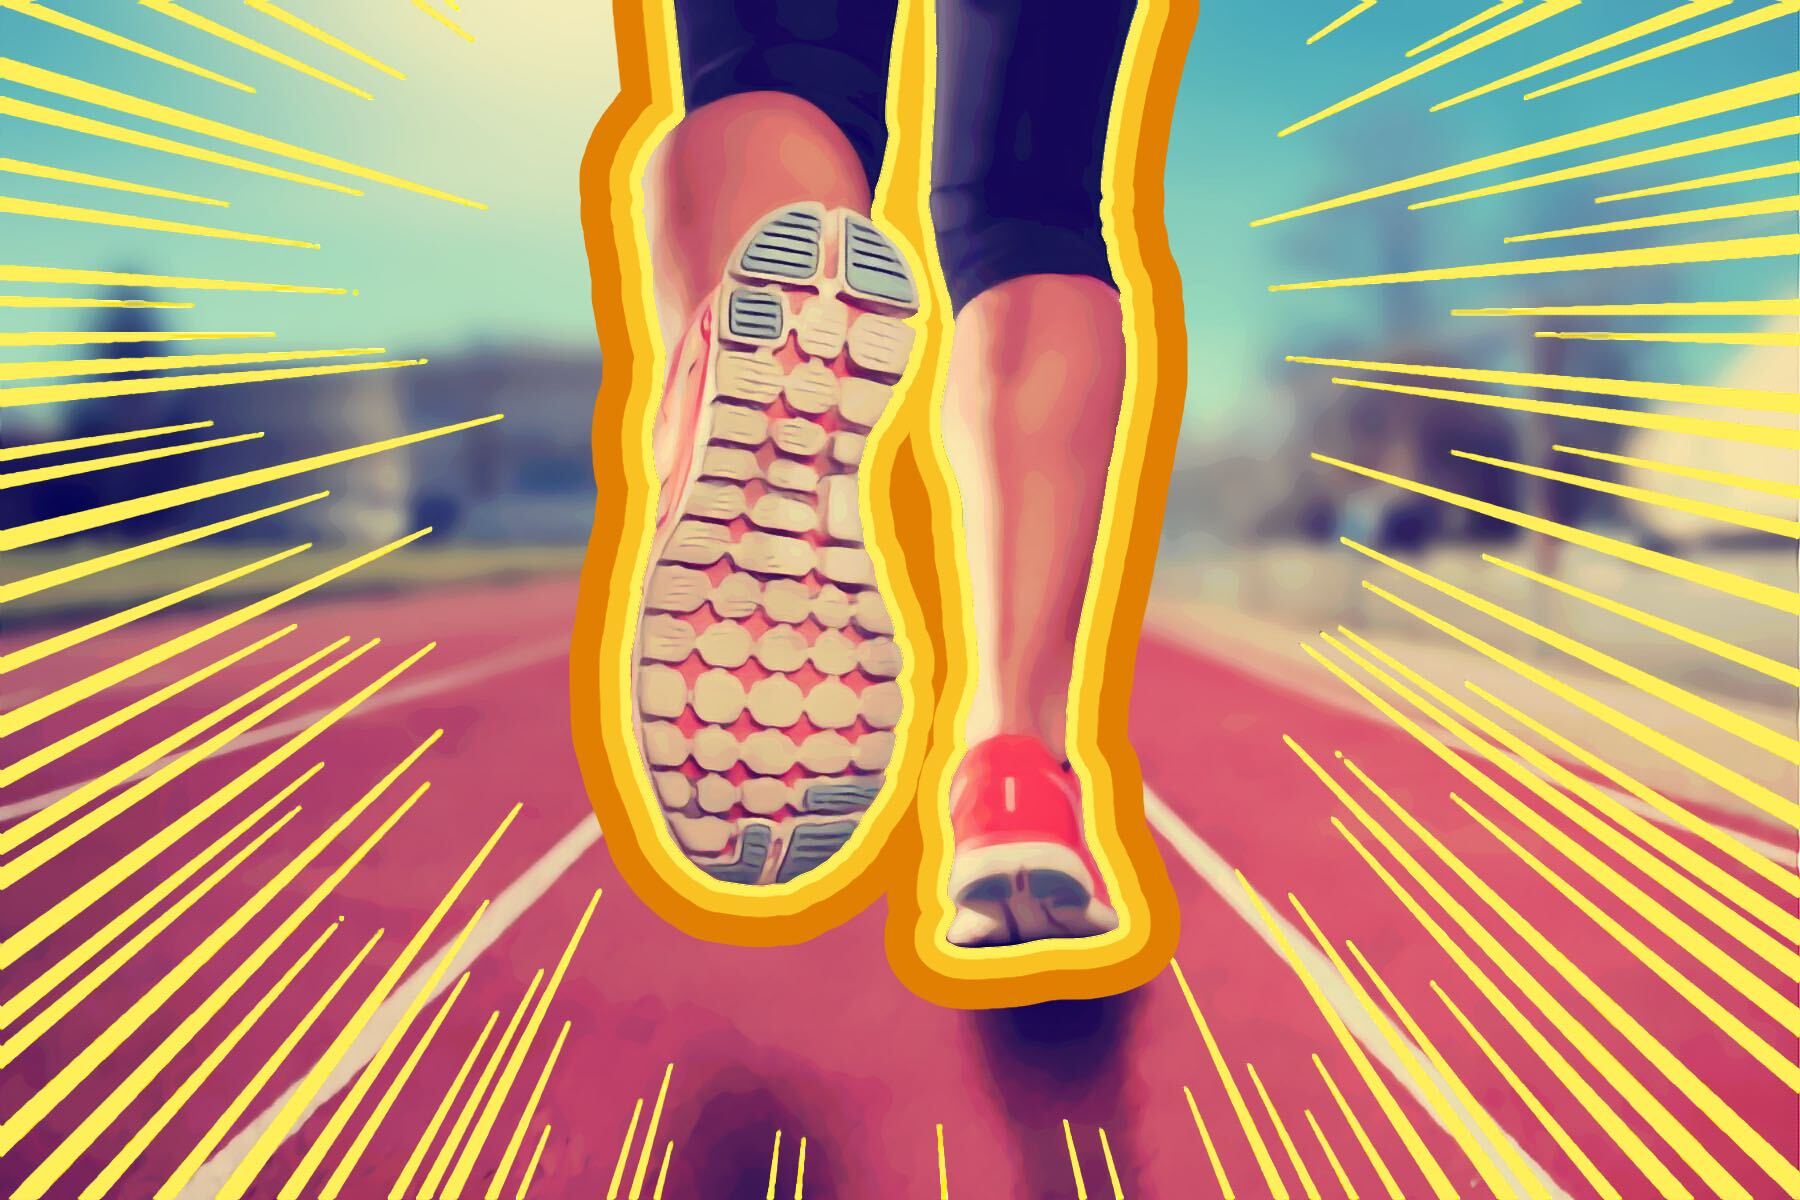 In an article about exercise, an illustration of someone jogging